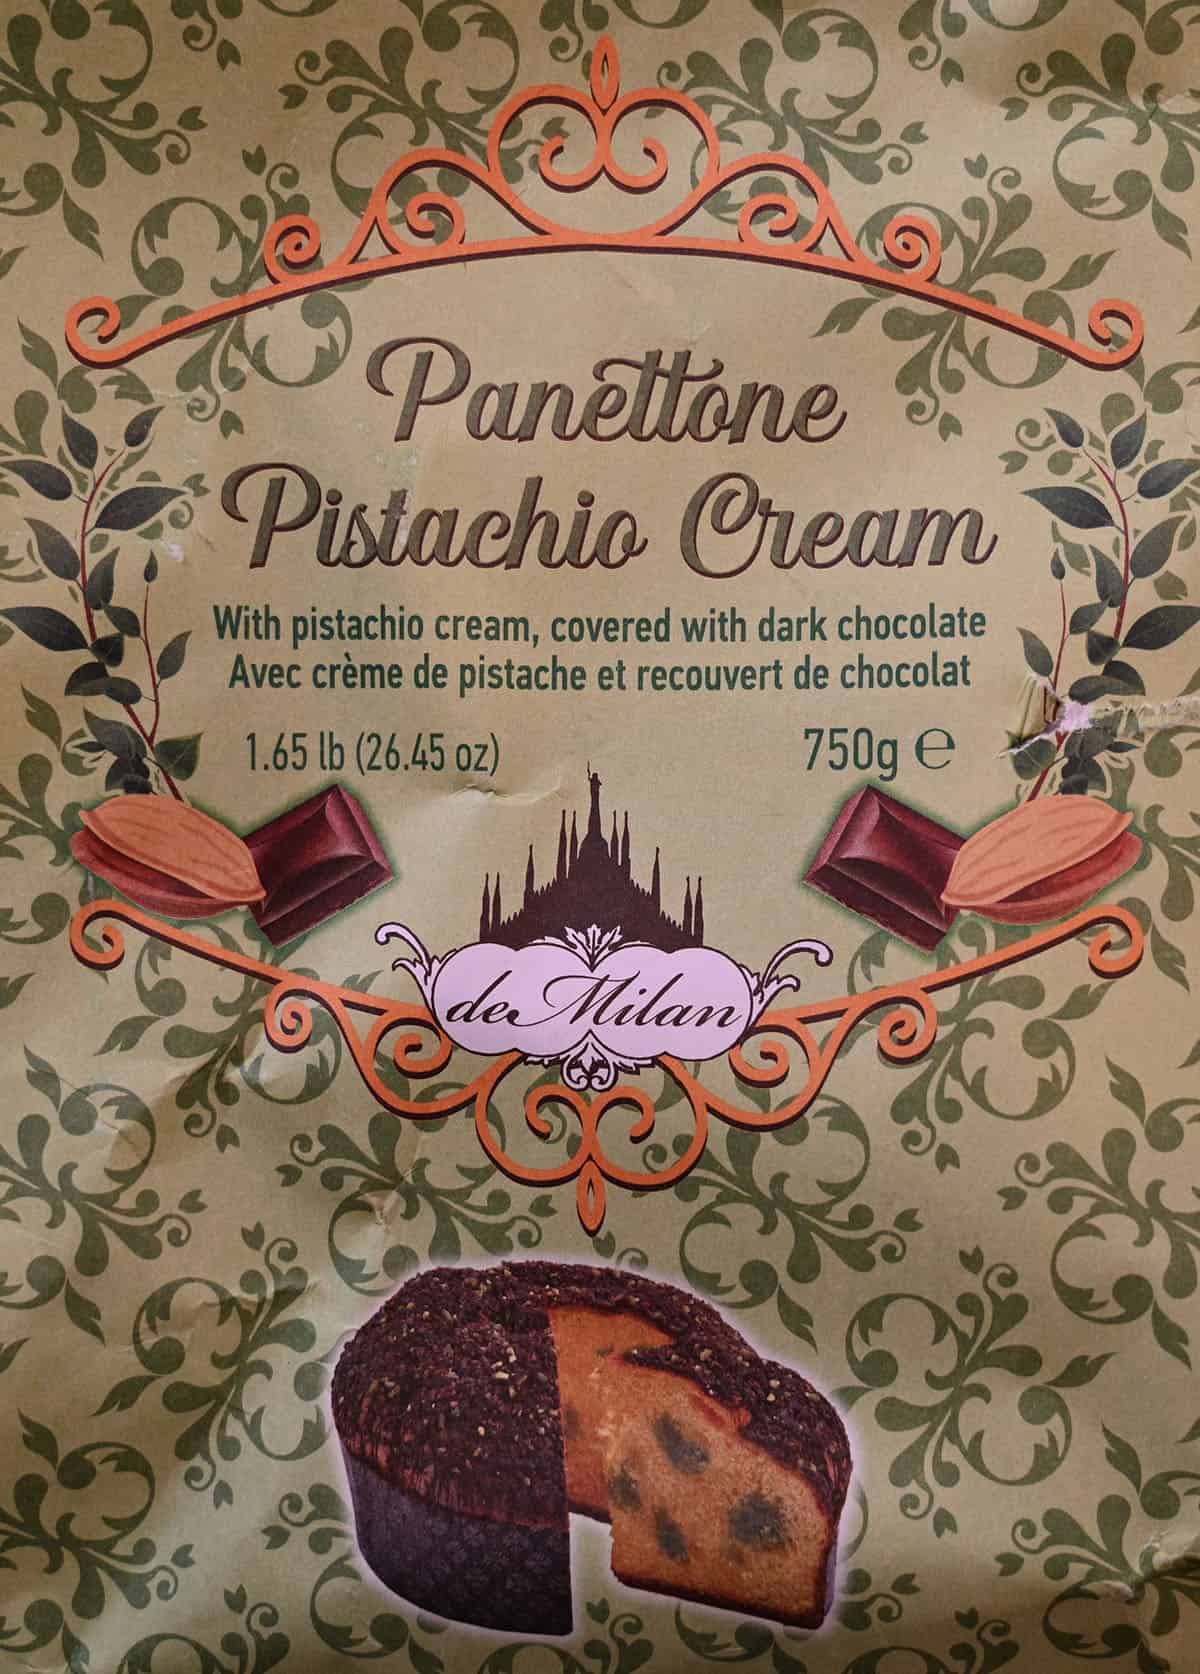 Close up image of the front label of the Costco de Milan Panettone.